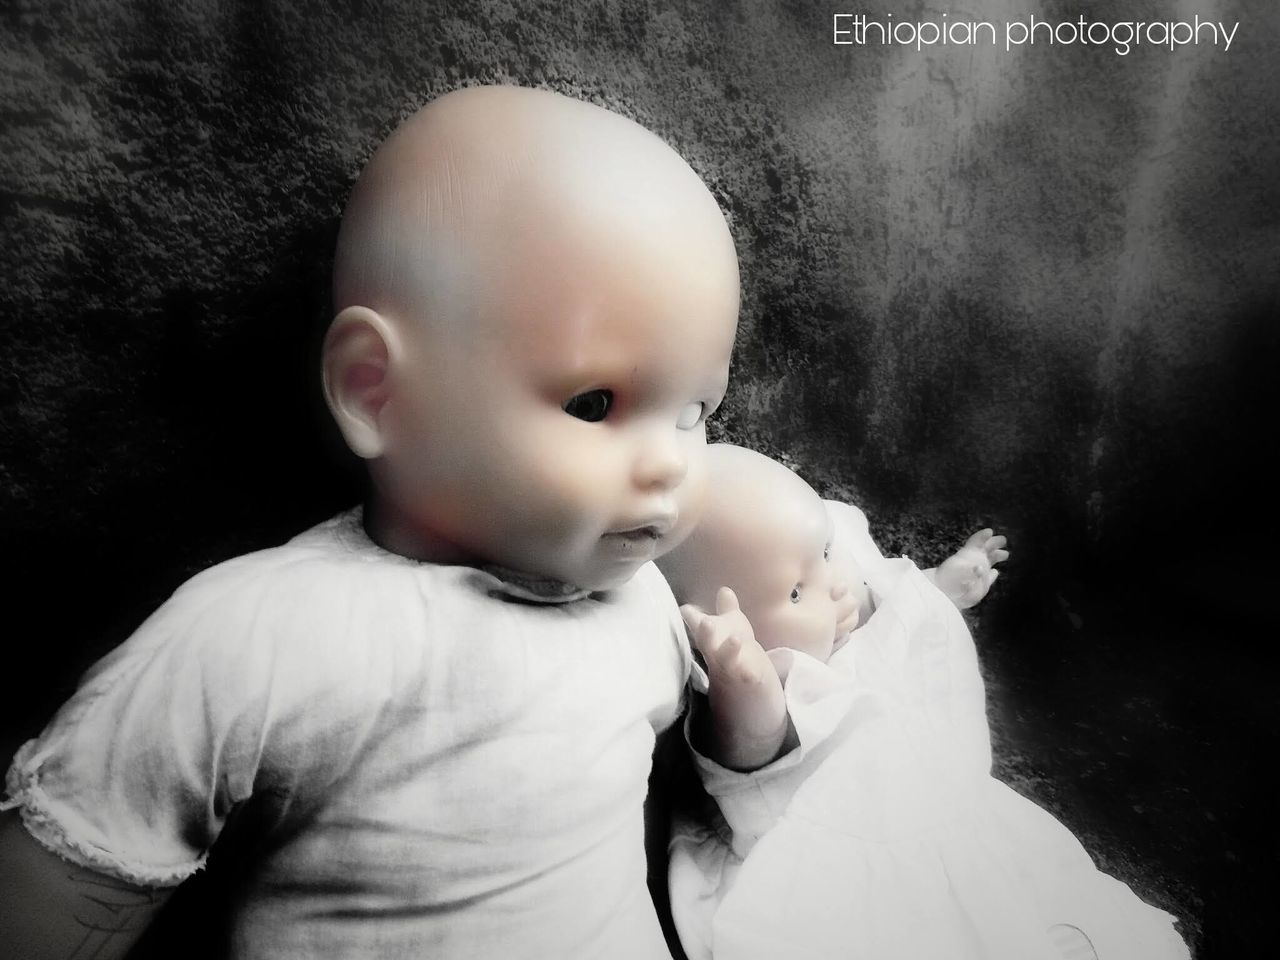 baby, black and white, child, childhood, person, portrait, portrait photography, monochrome photography, monochrome, human face, beginnings, indoors, innocence, black, white, emotion, cute, babyhood, one person, adult, toddler, nose, human head, nature, newborn, waist up, love, studio shot, looking, positive emotion